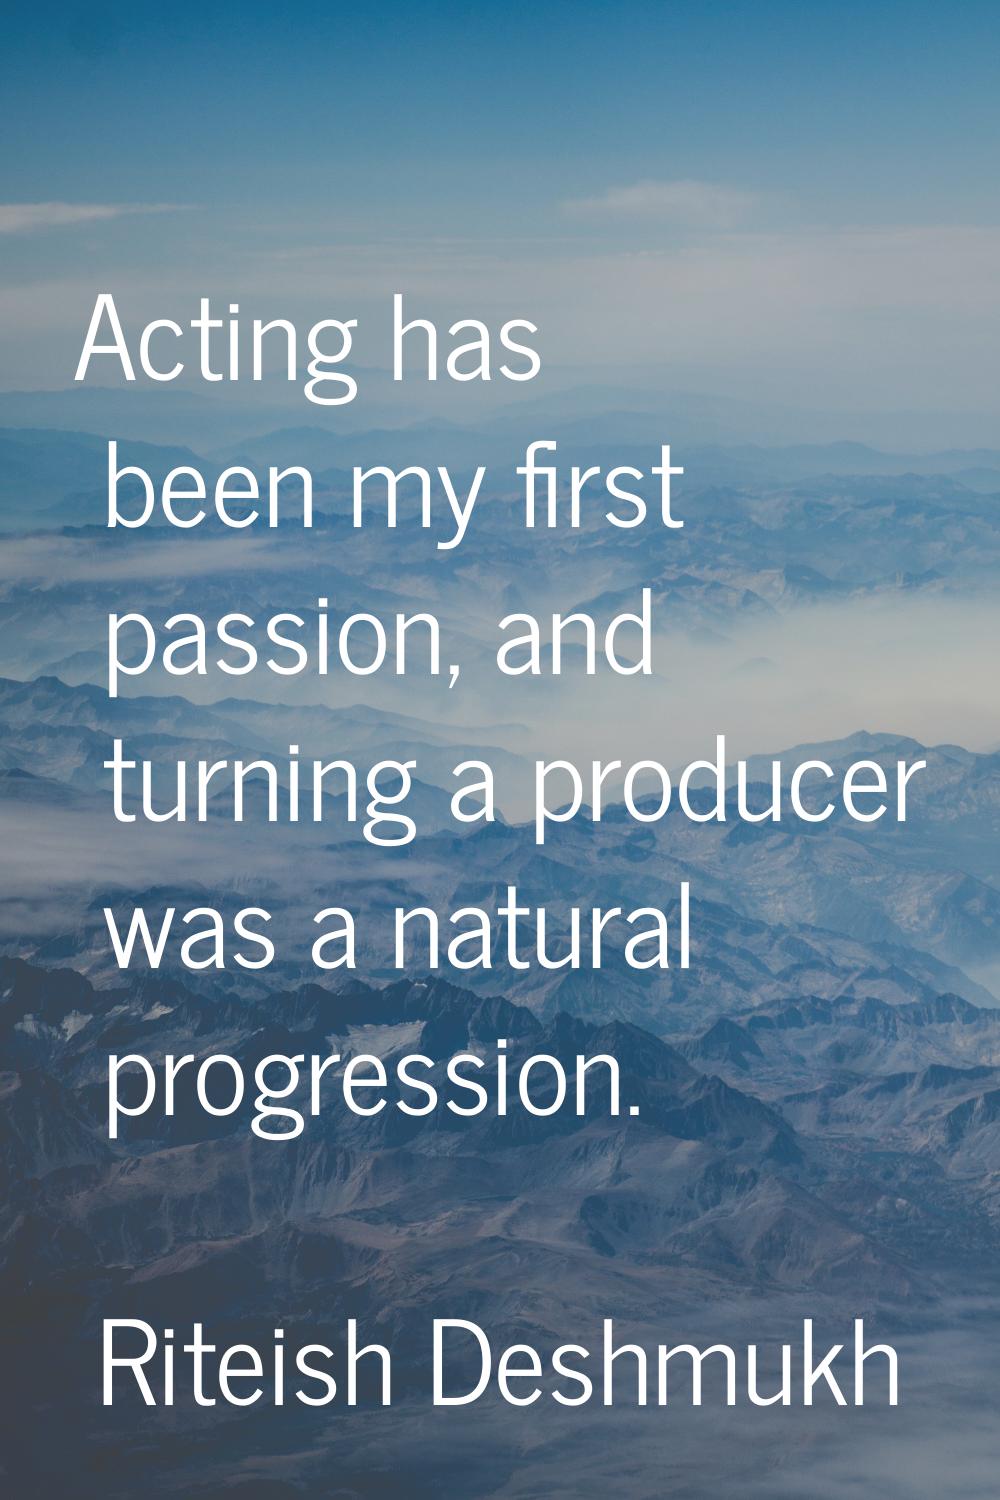 Acting has been my first passion, and turning a producer was a natural progression.